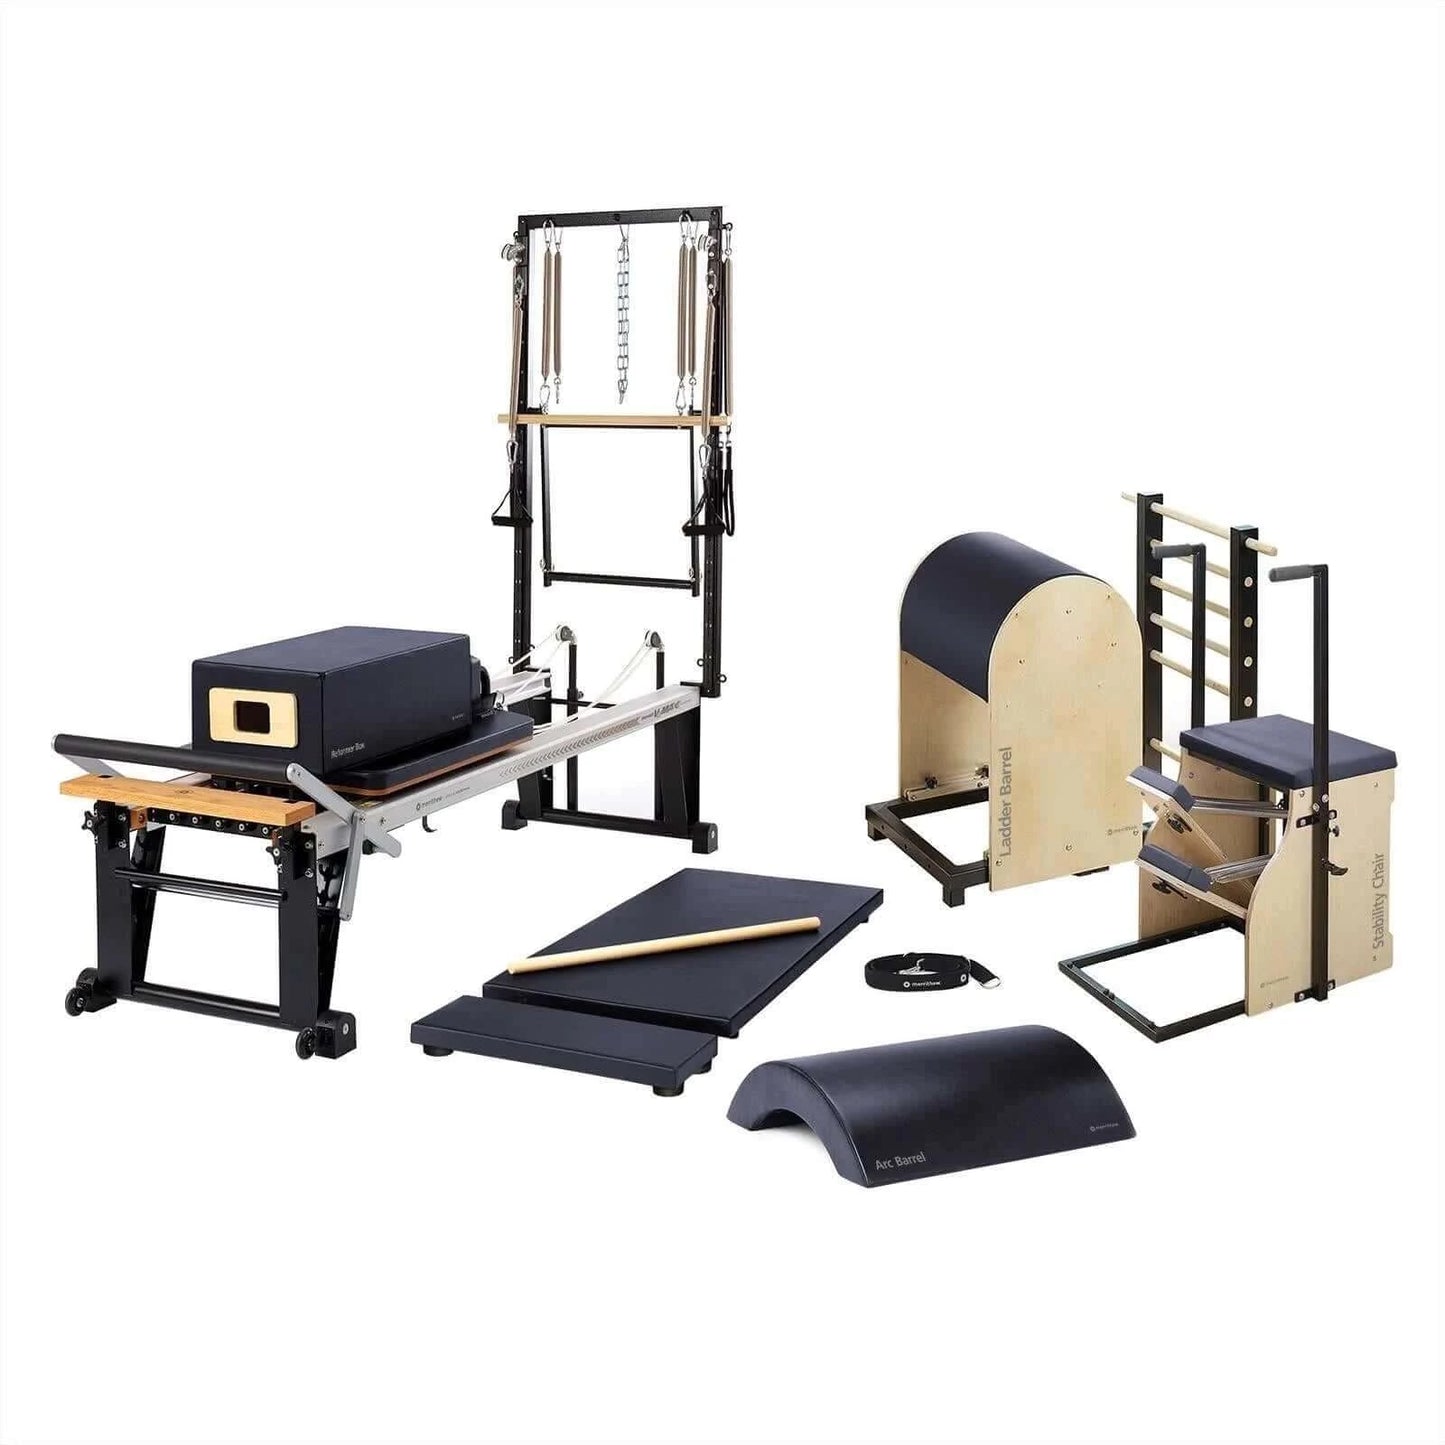 Eclipse Merrithew™ Pilates Rehab One-On-One Studio Bundle by Merrithew™ sold by Pilates Matters® by BSP LLC